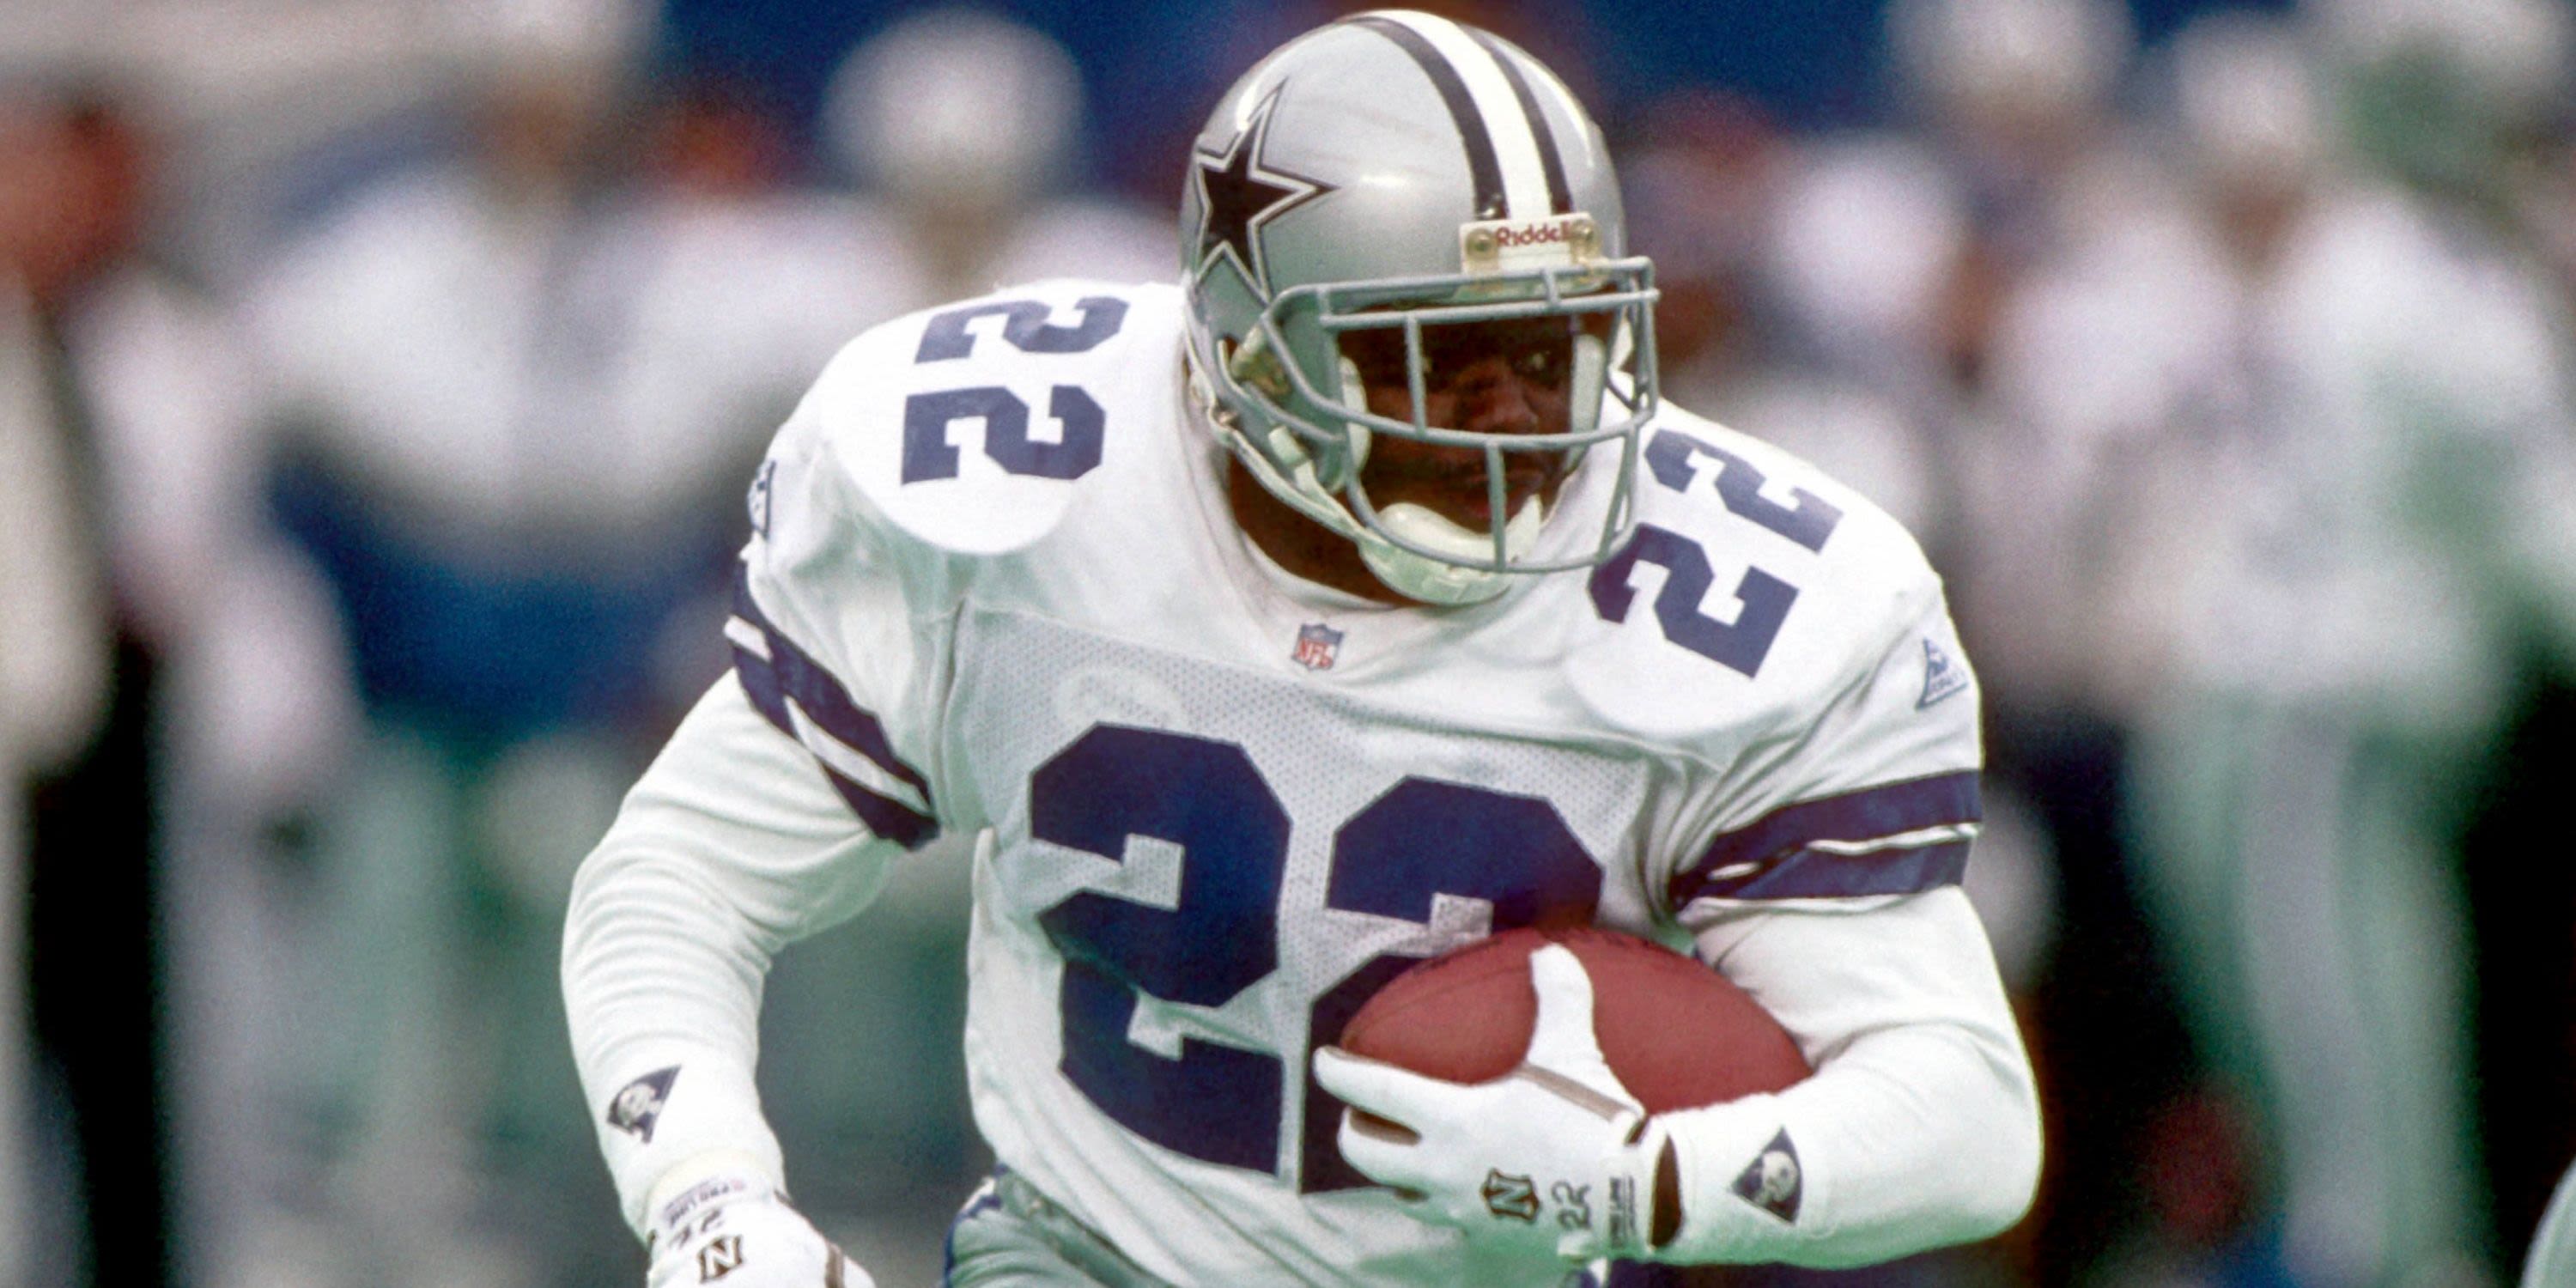 The 10 Running Backs With the Most Rushing Yards in NFL History